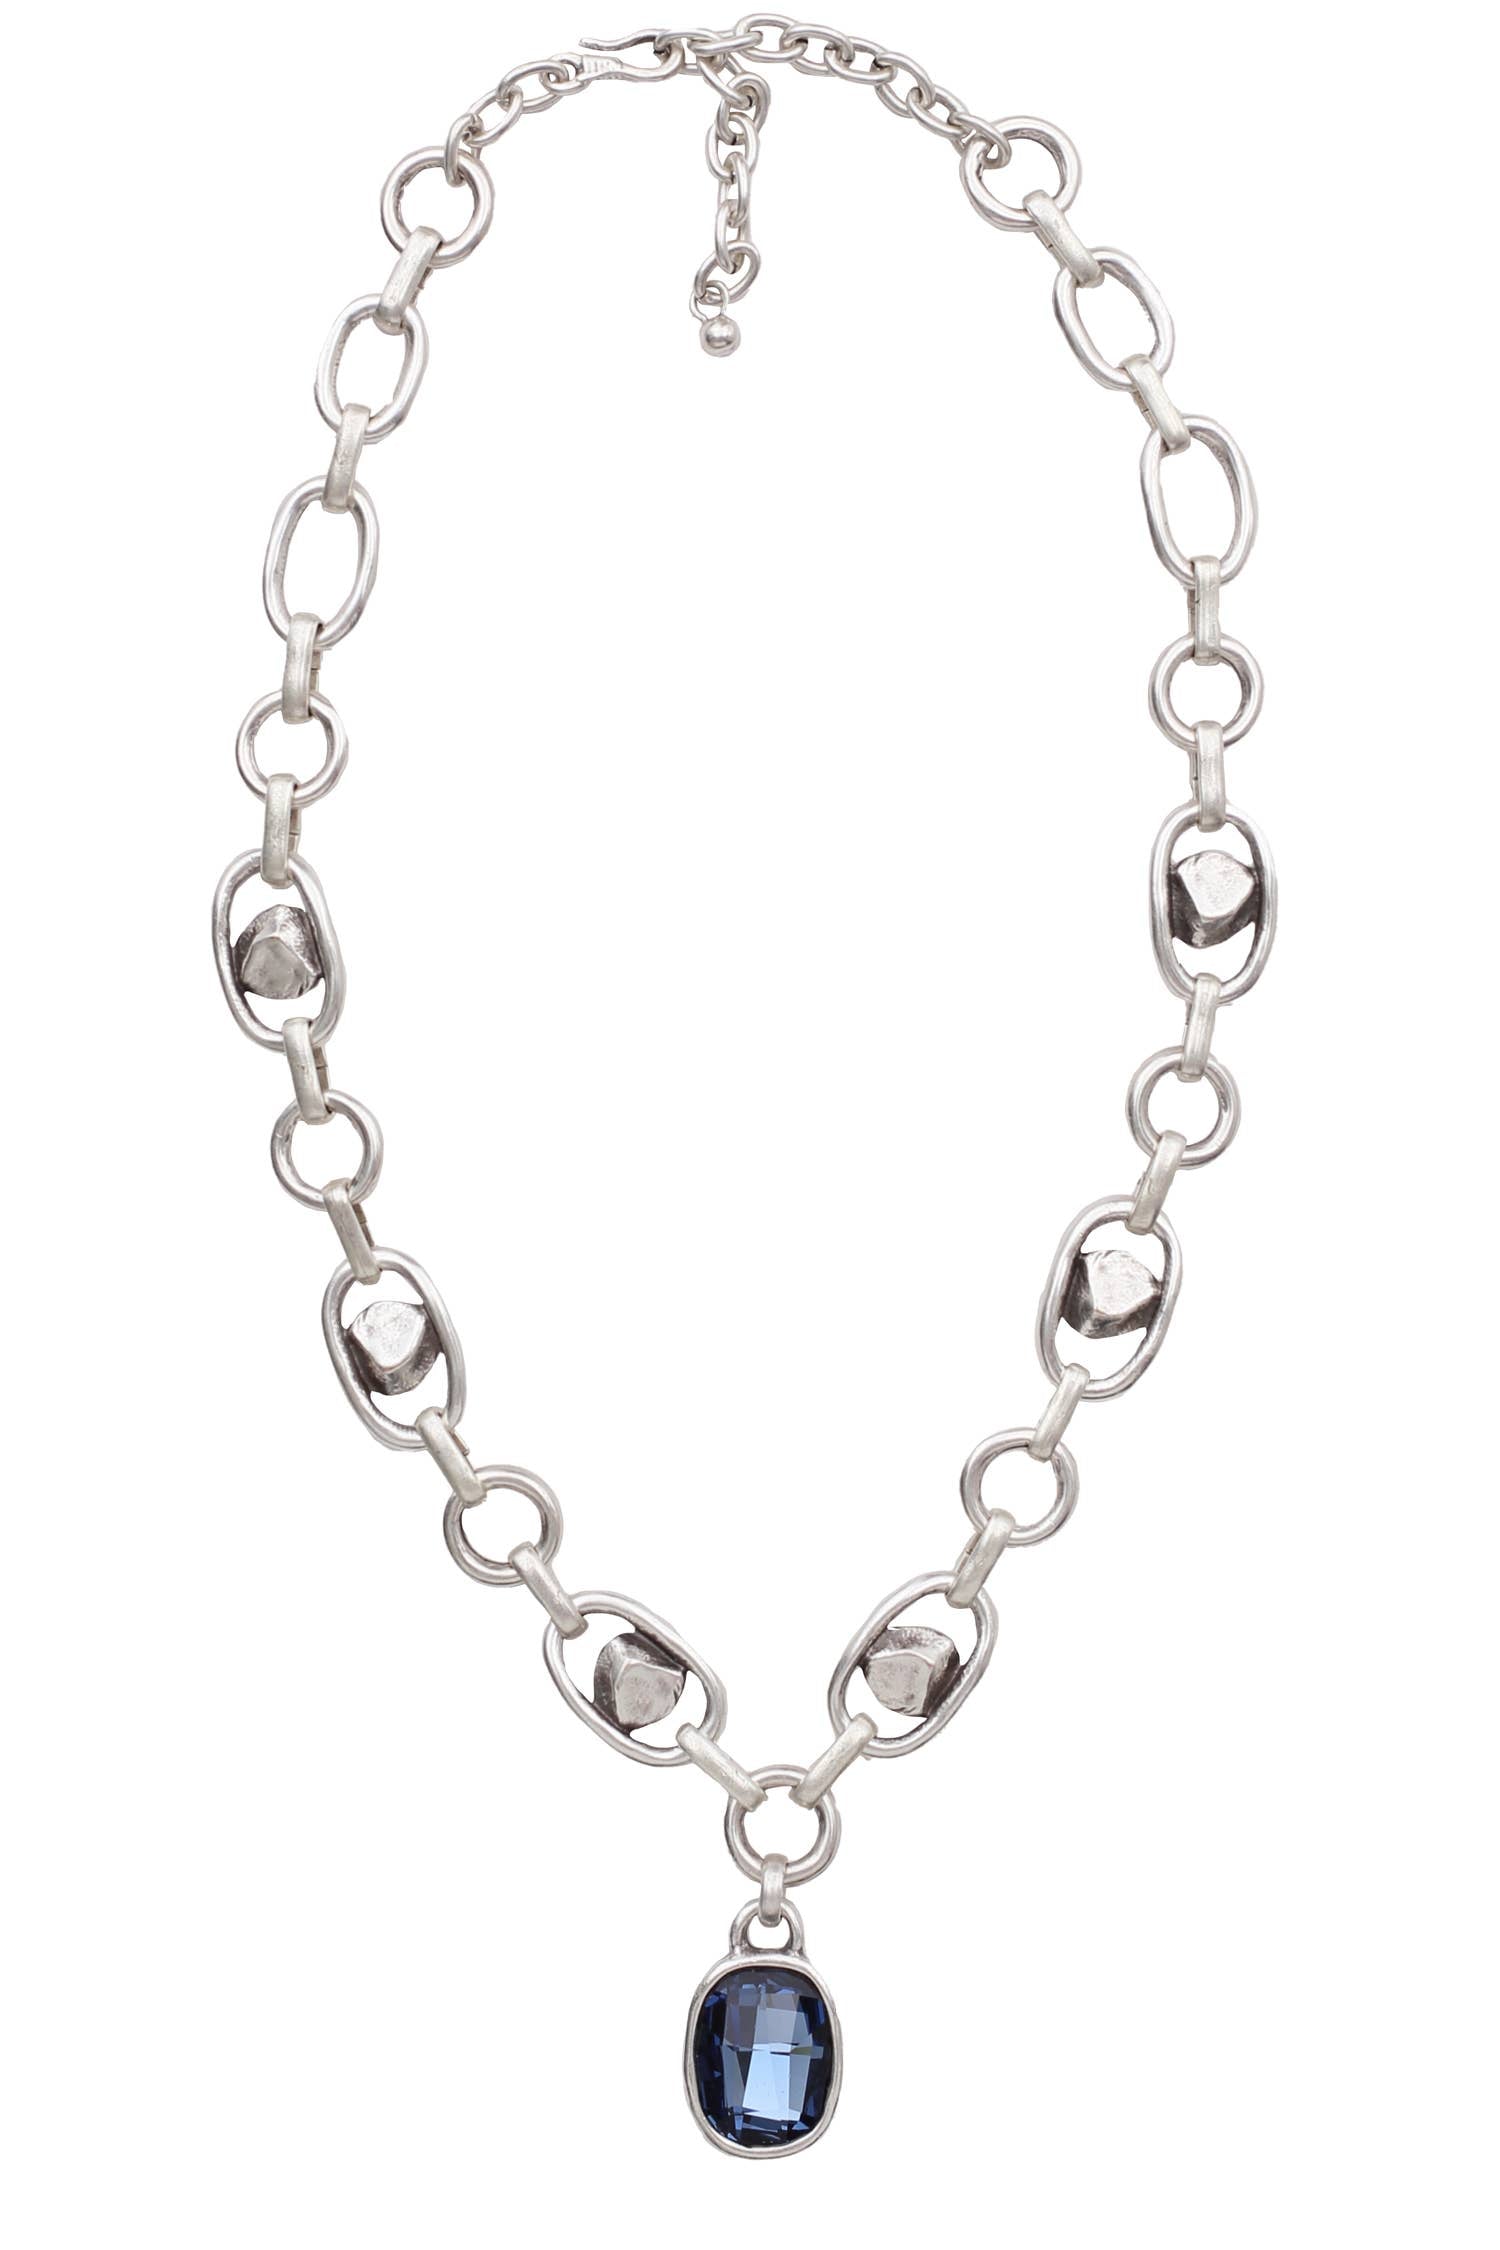 The Ladonna Handmade Pewter Necklace - Coco and lulu boutique 